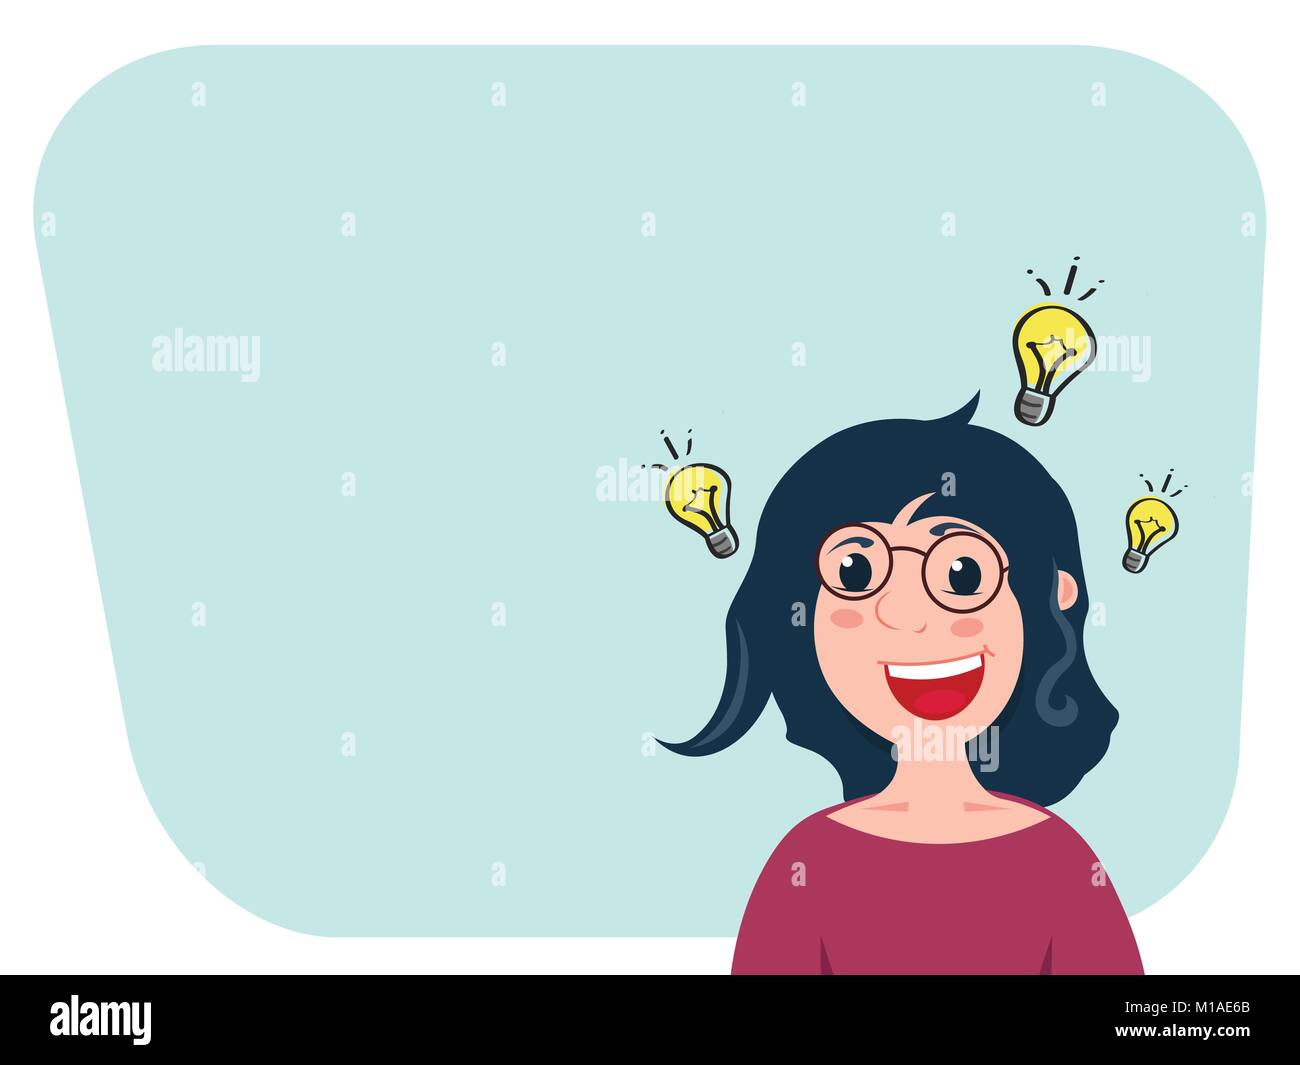 Caucasian woman cartoon character is inspired with idea for startup or good news. Lamp sign near her head. Stock Vector